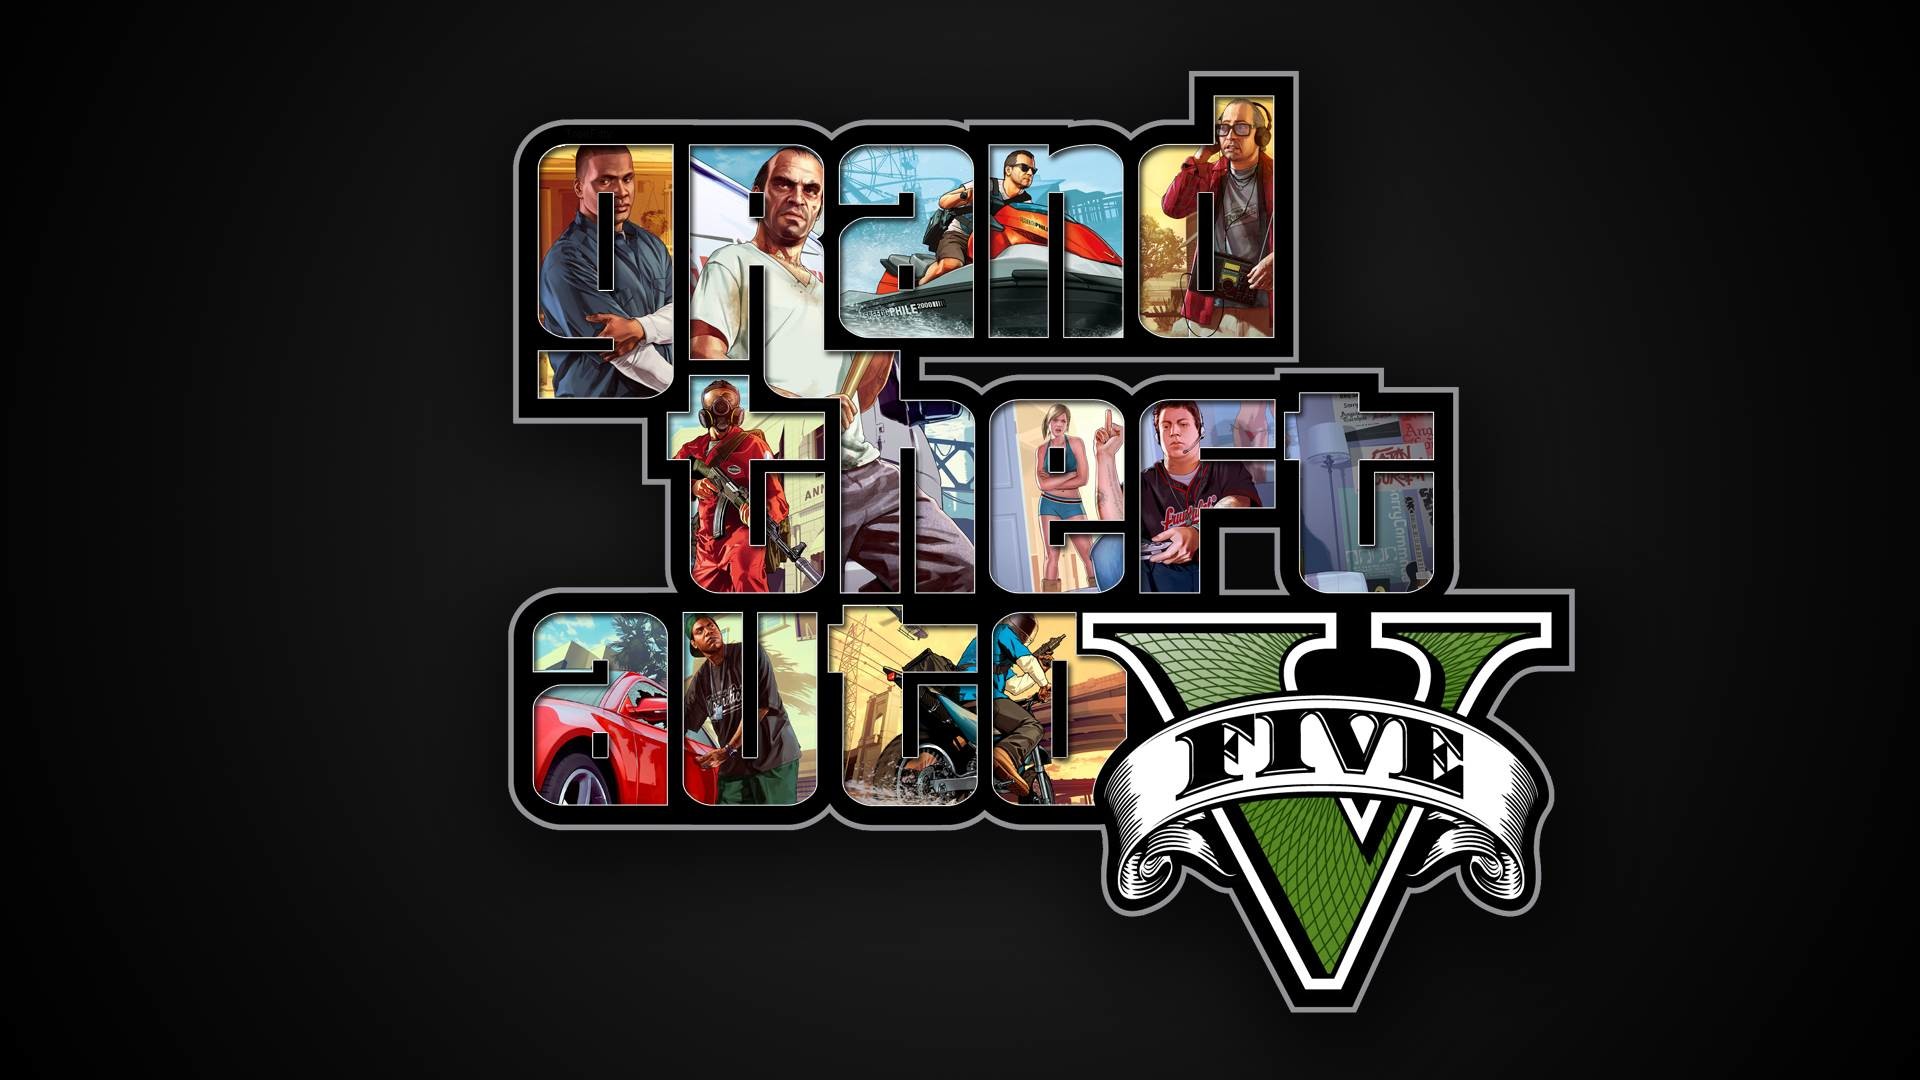 1920x1080 Collection of Gta V Wallpaper on HDWallpapers 1920Ã1080